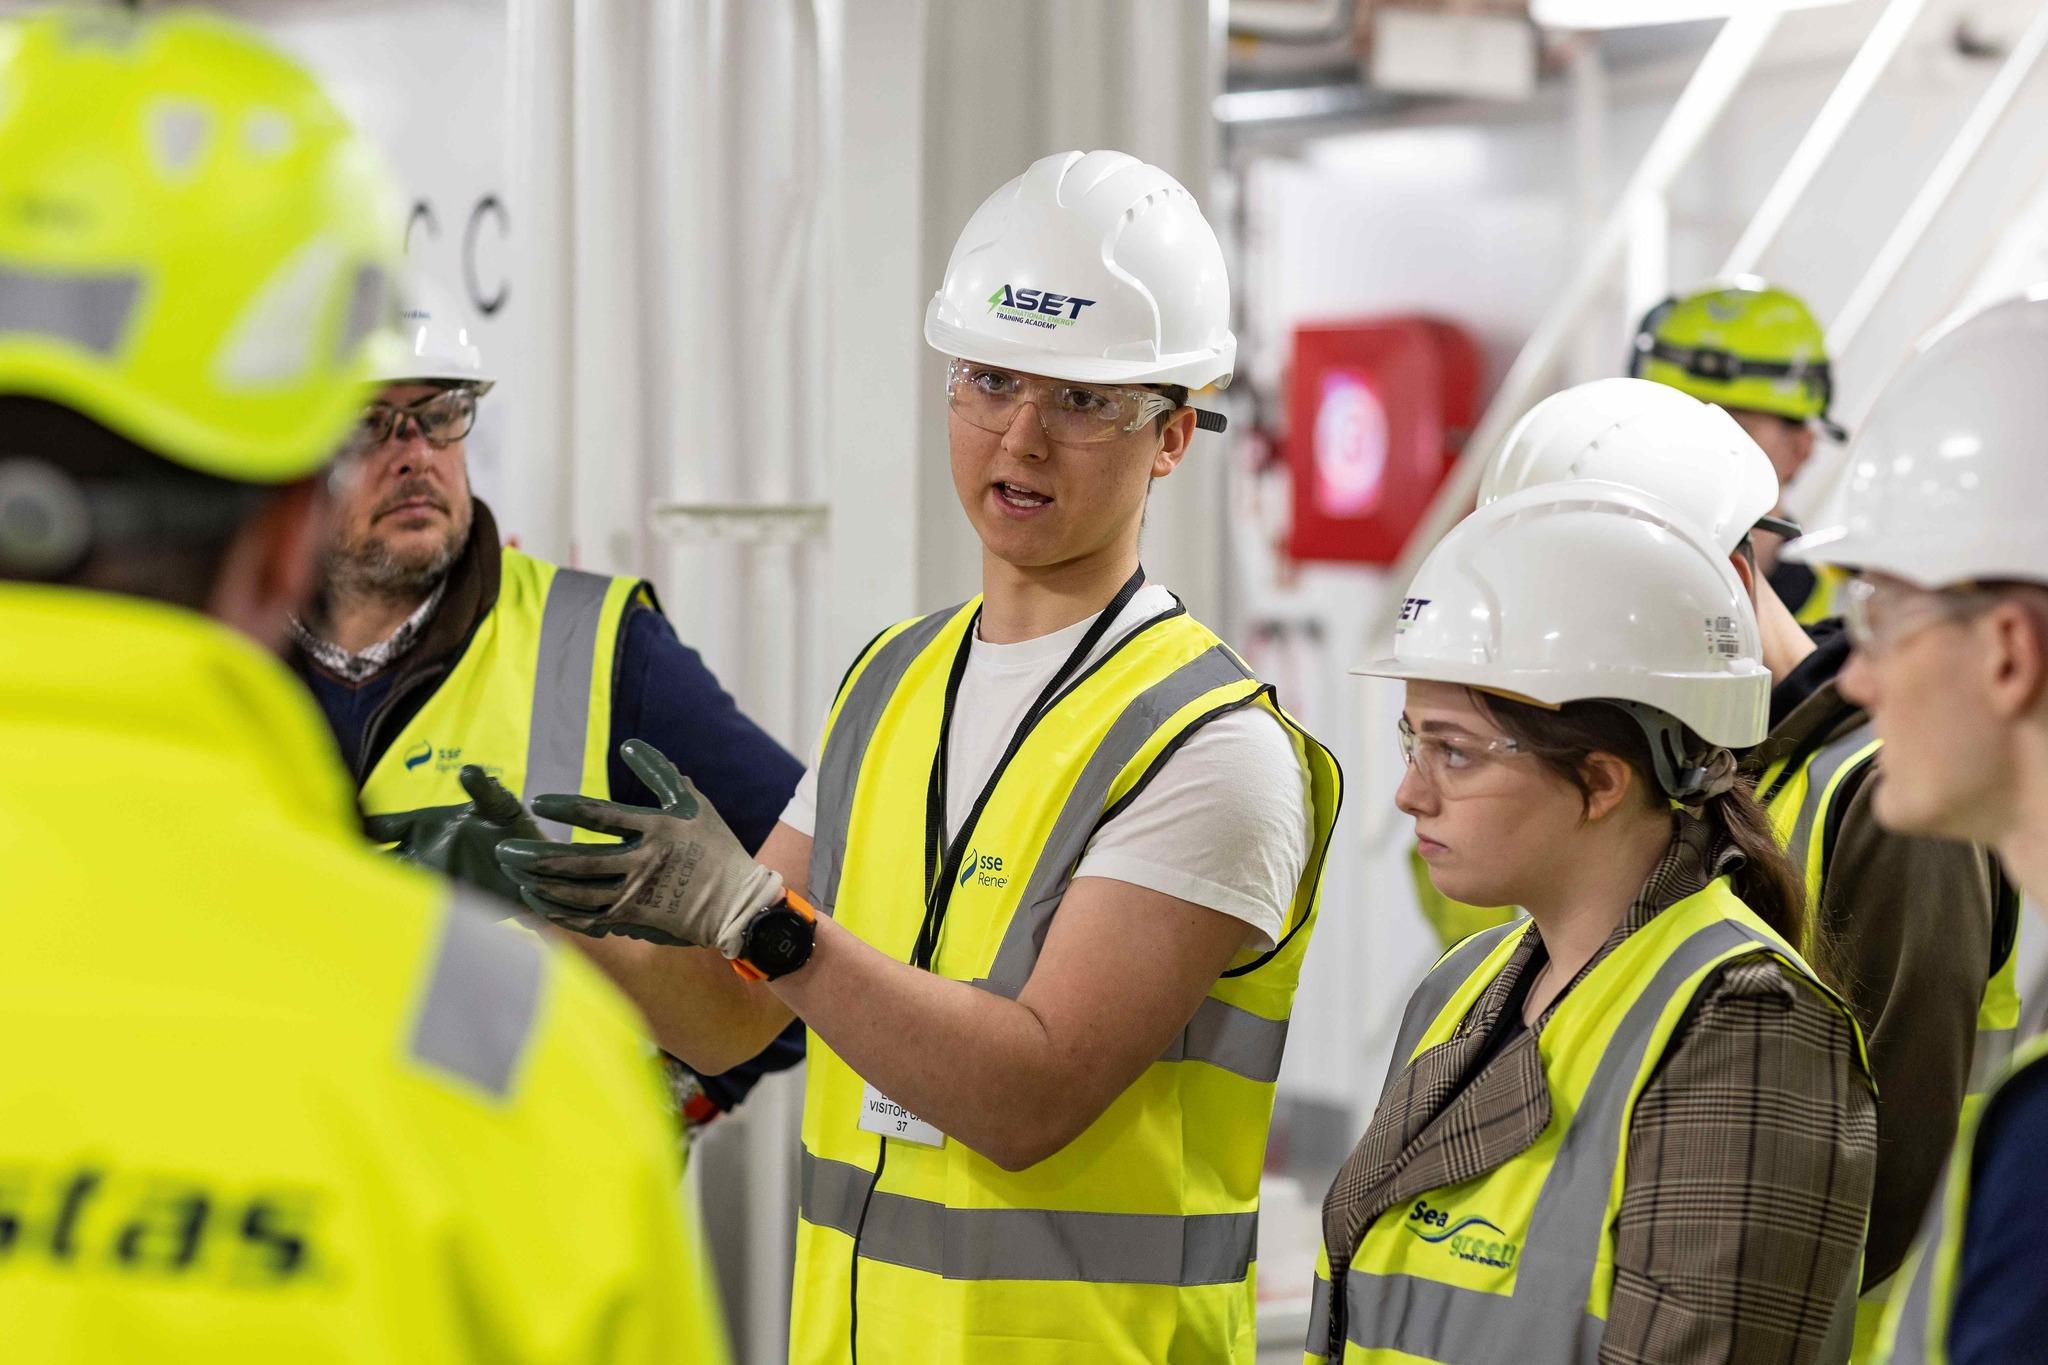 ECITB Wind Turbine scholars, currently studying at Nes Col, got a flavour of life working offshore at the Operations and Maintenance base at Montrose Port which services the Seagreen offshore wind farm, currently under construction.